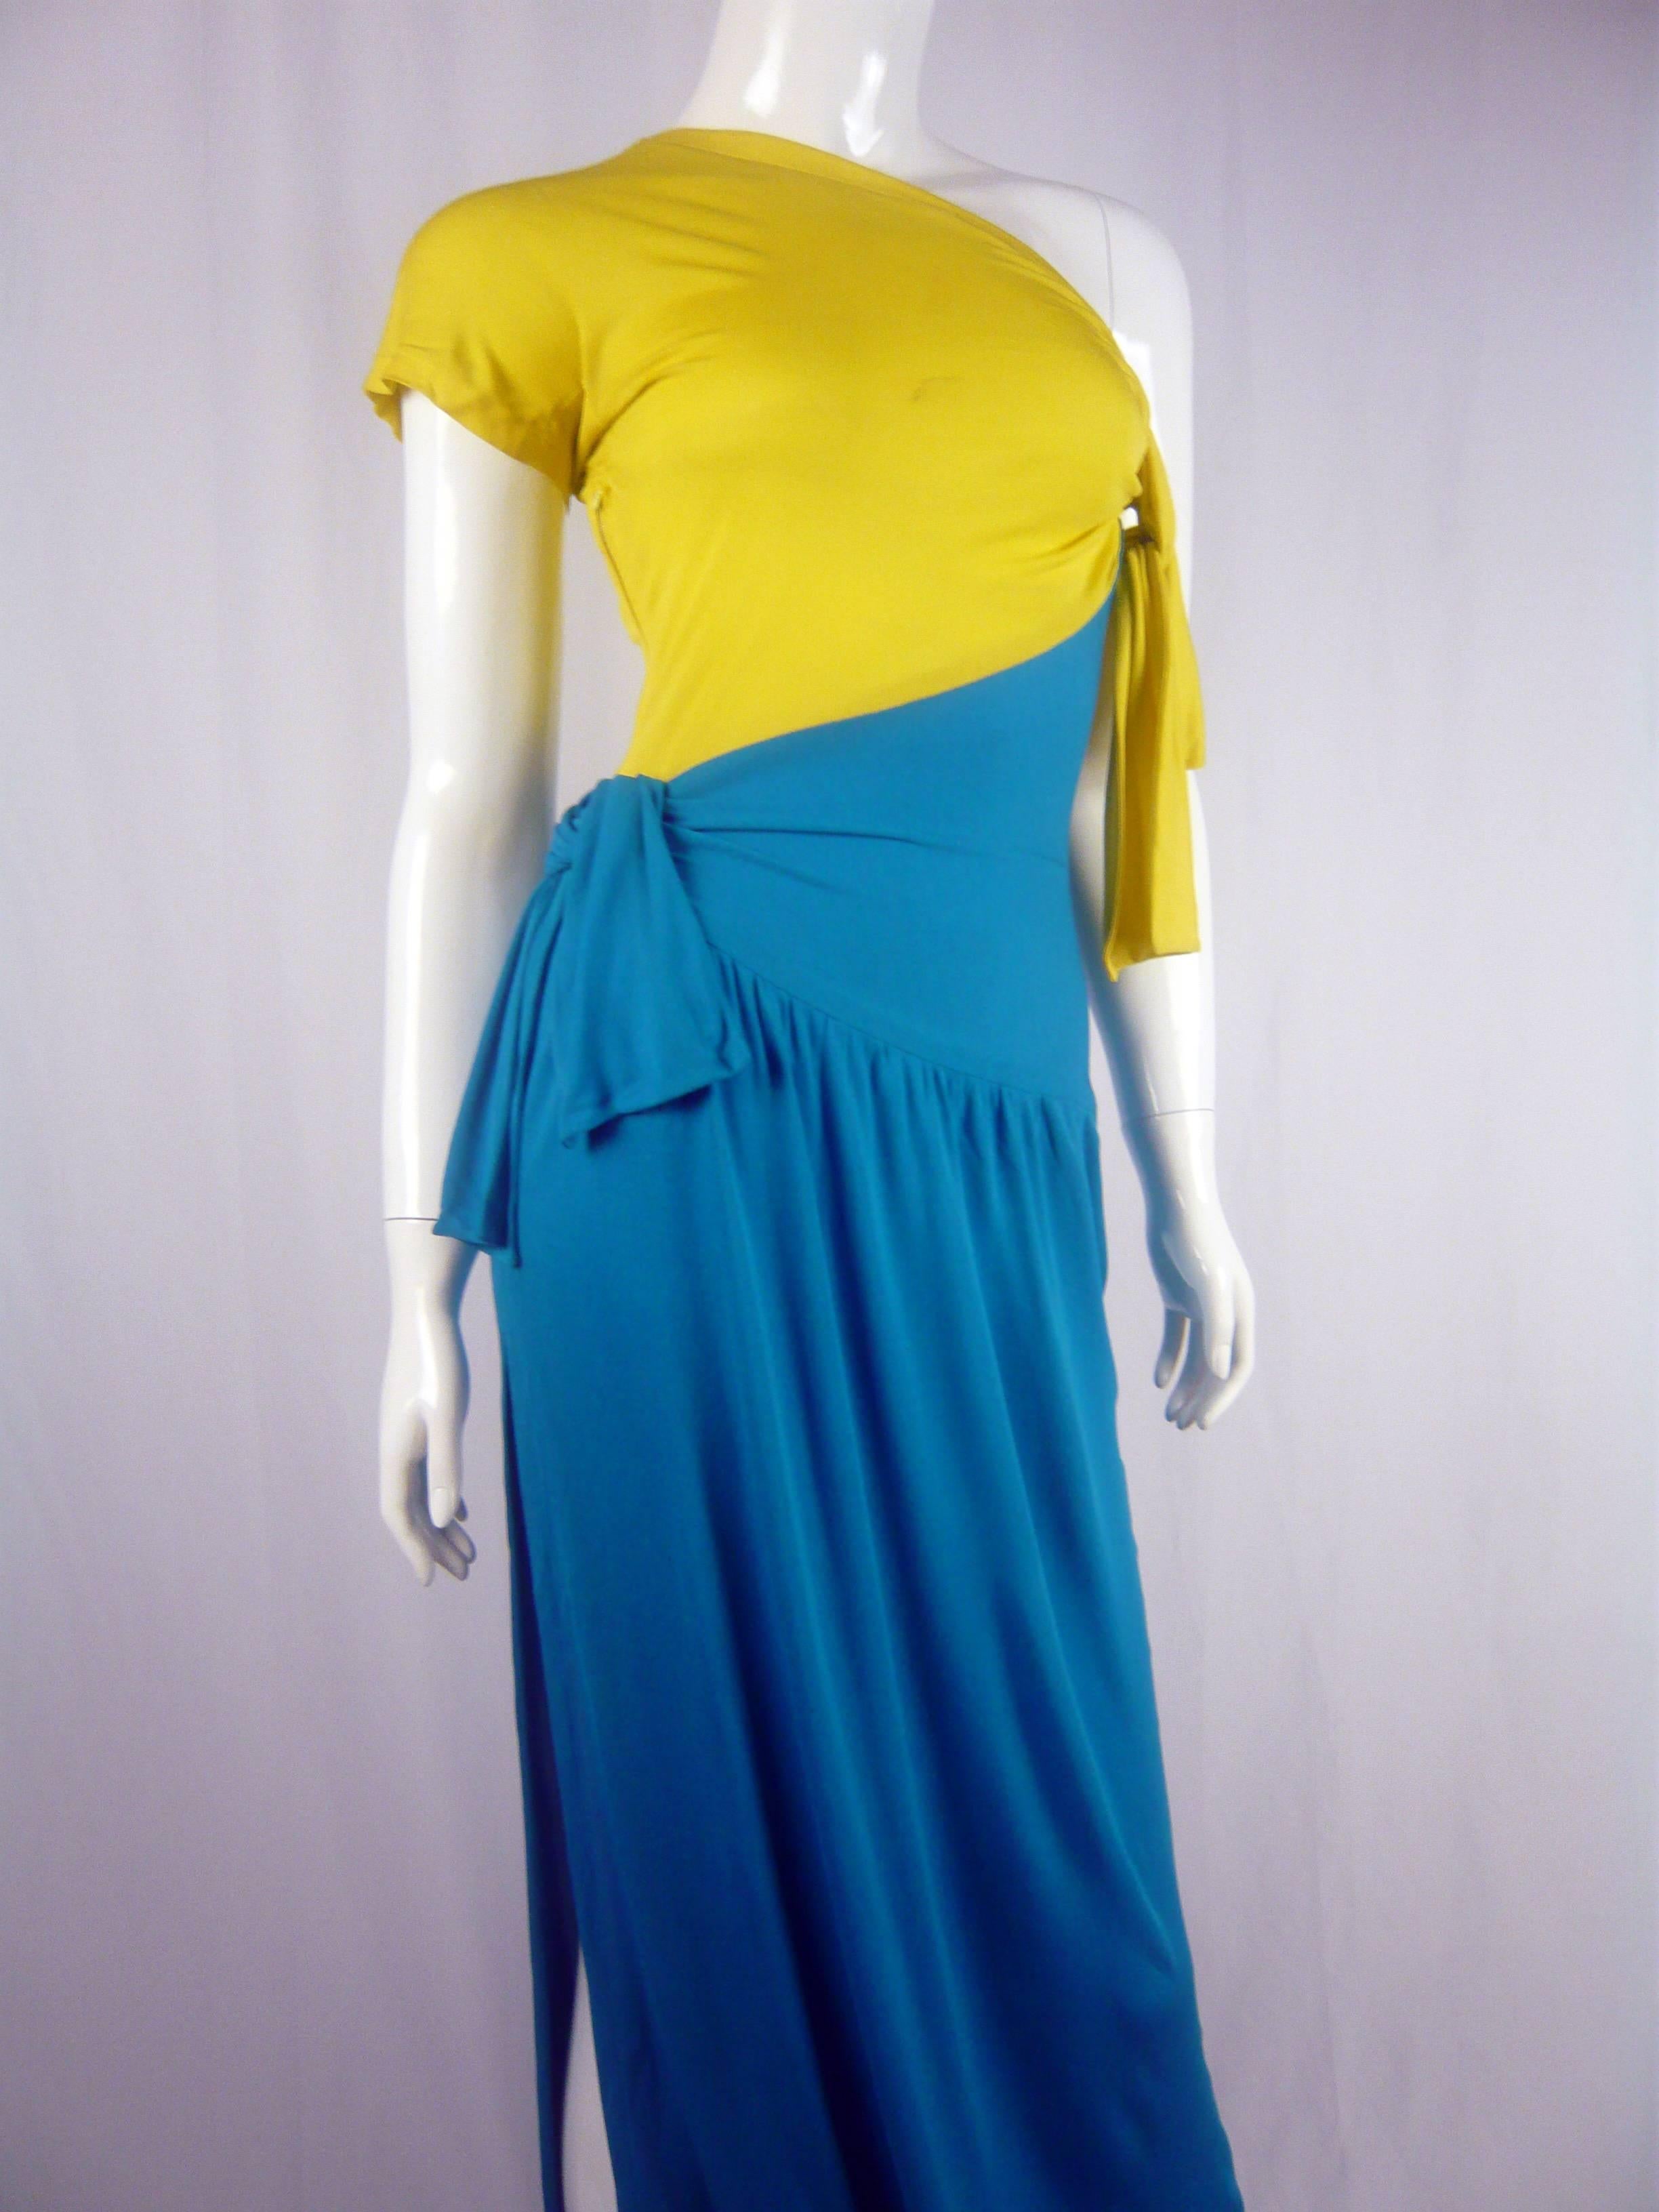 Michel Goma One Shoulder Jersey Dress  In Excellent Condition For Sale In West Hollywood, CA